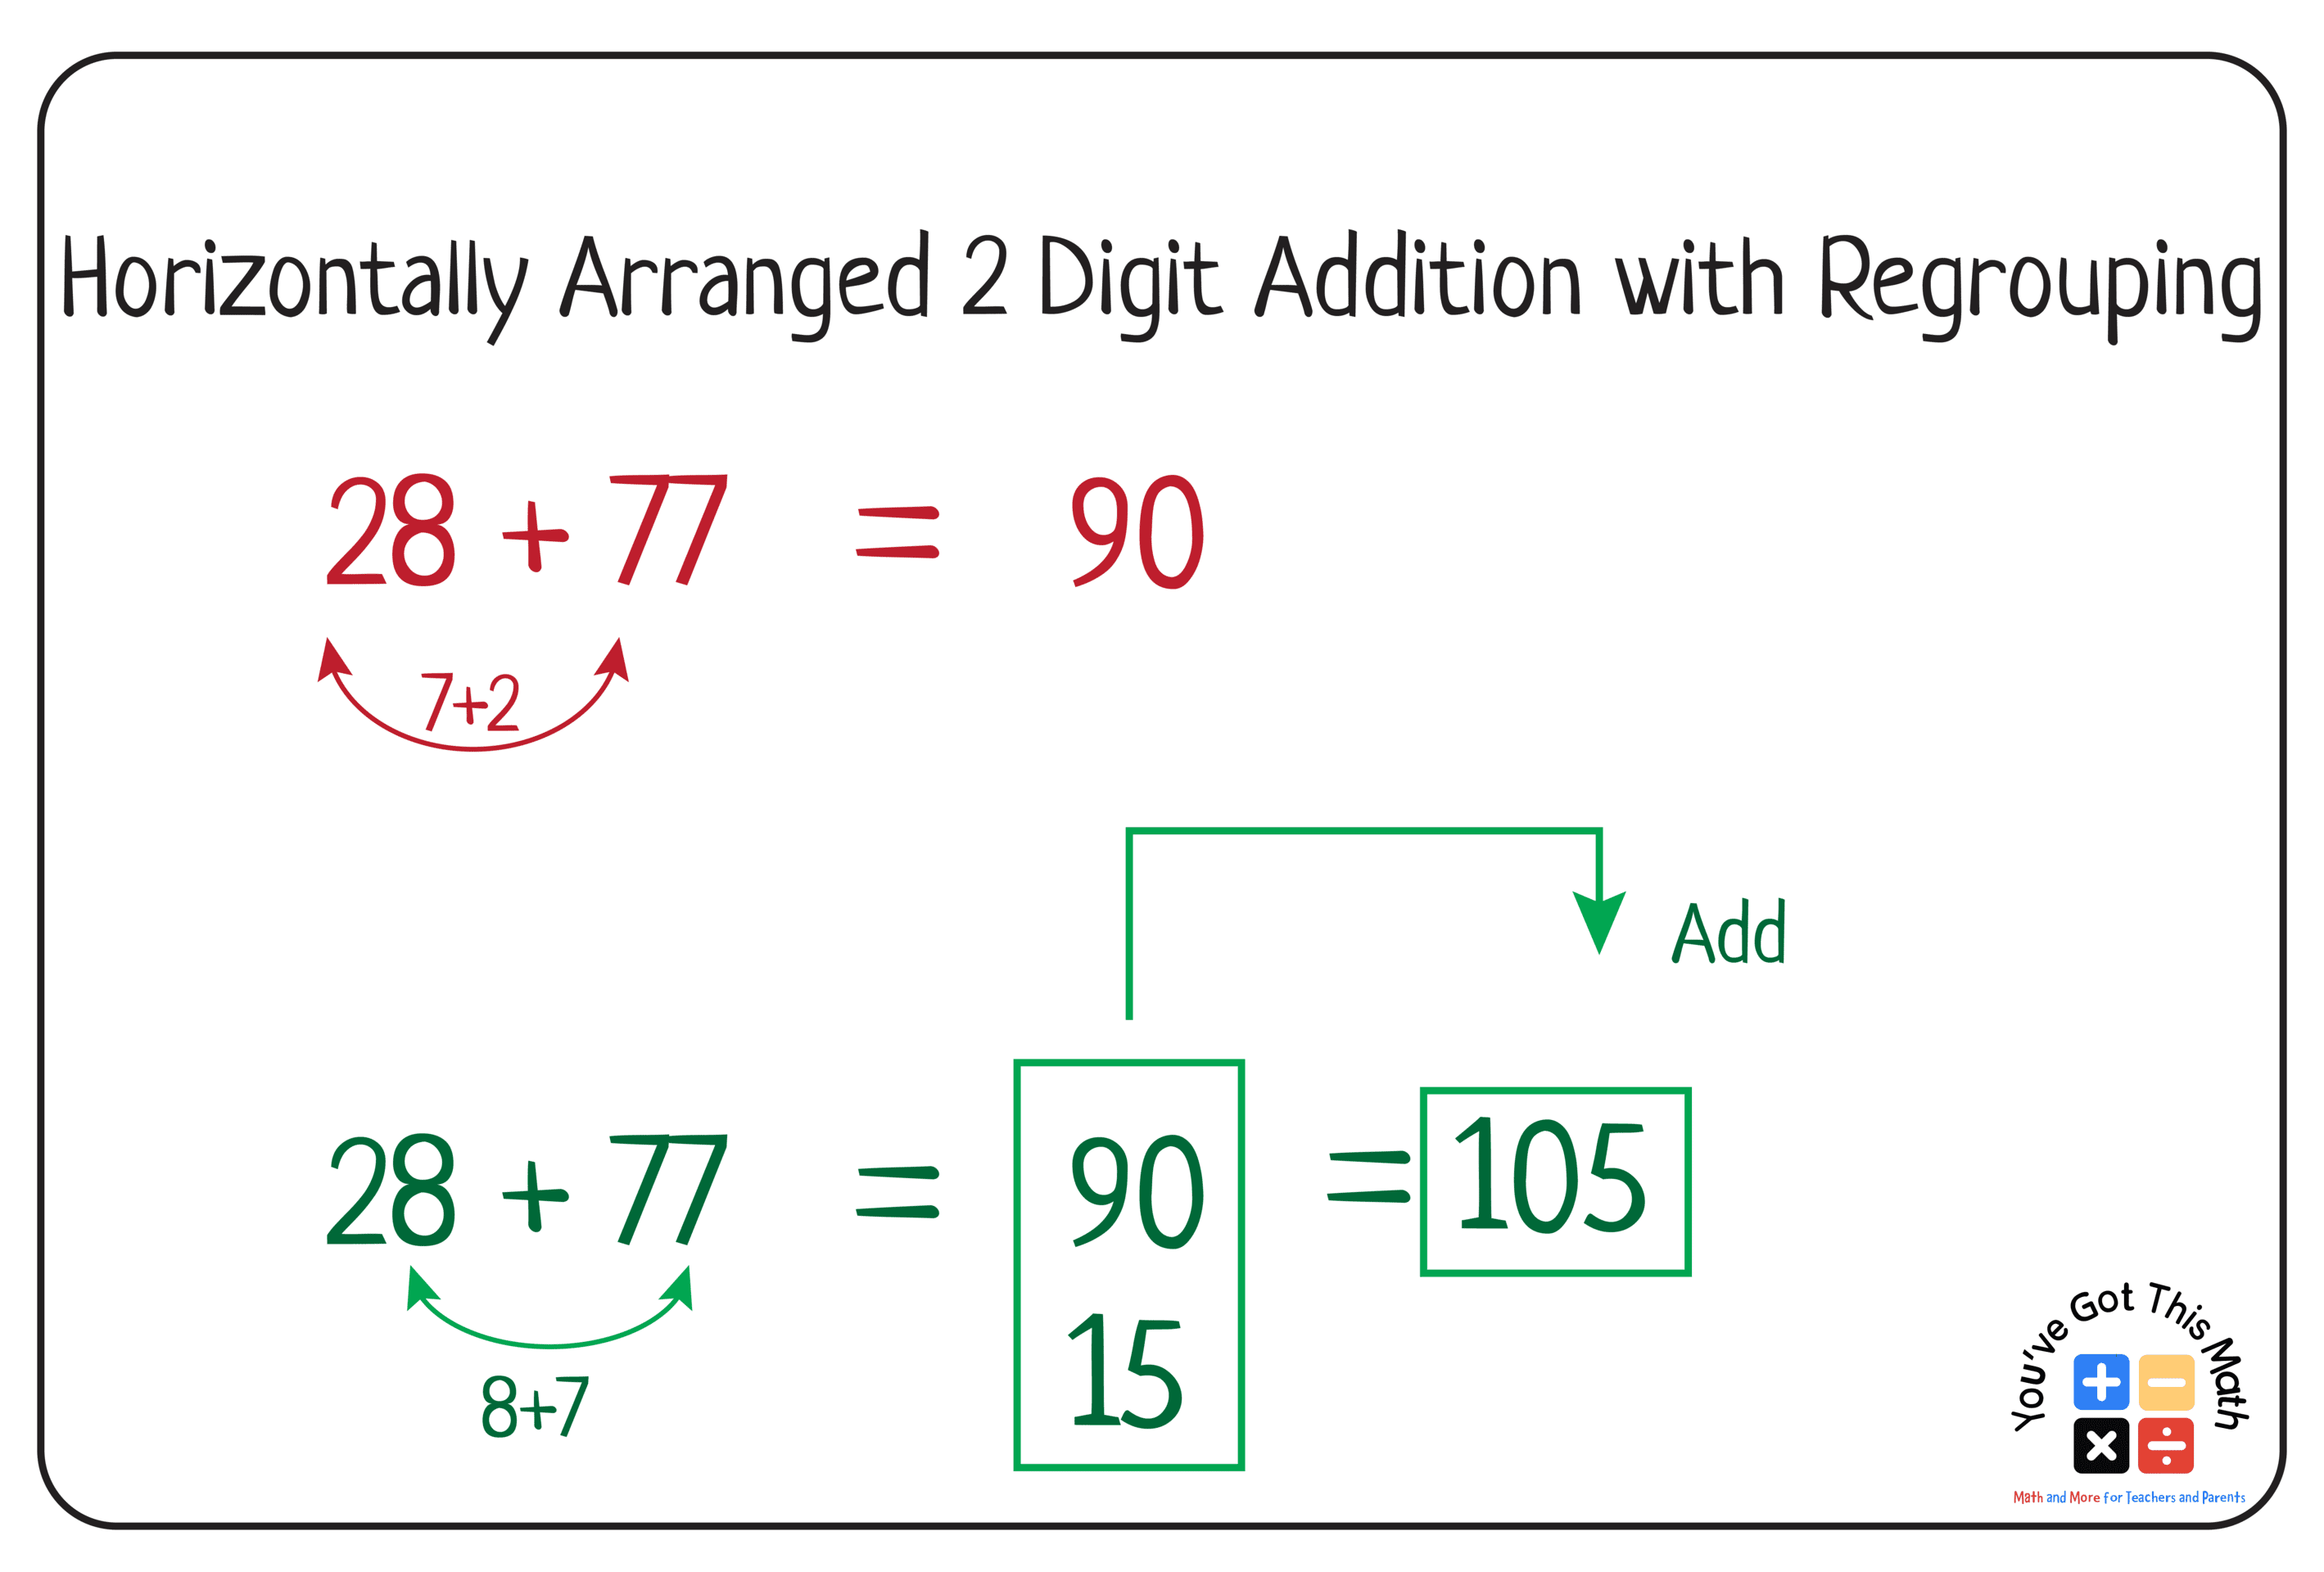 Horizontally Arranged 2 Digit Addition with Regrouping